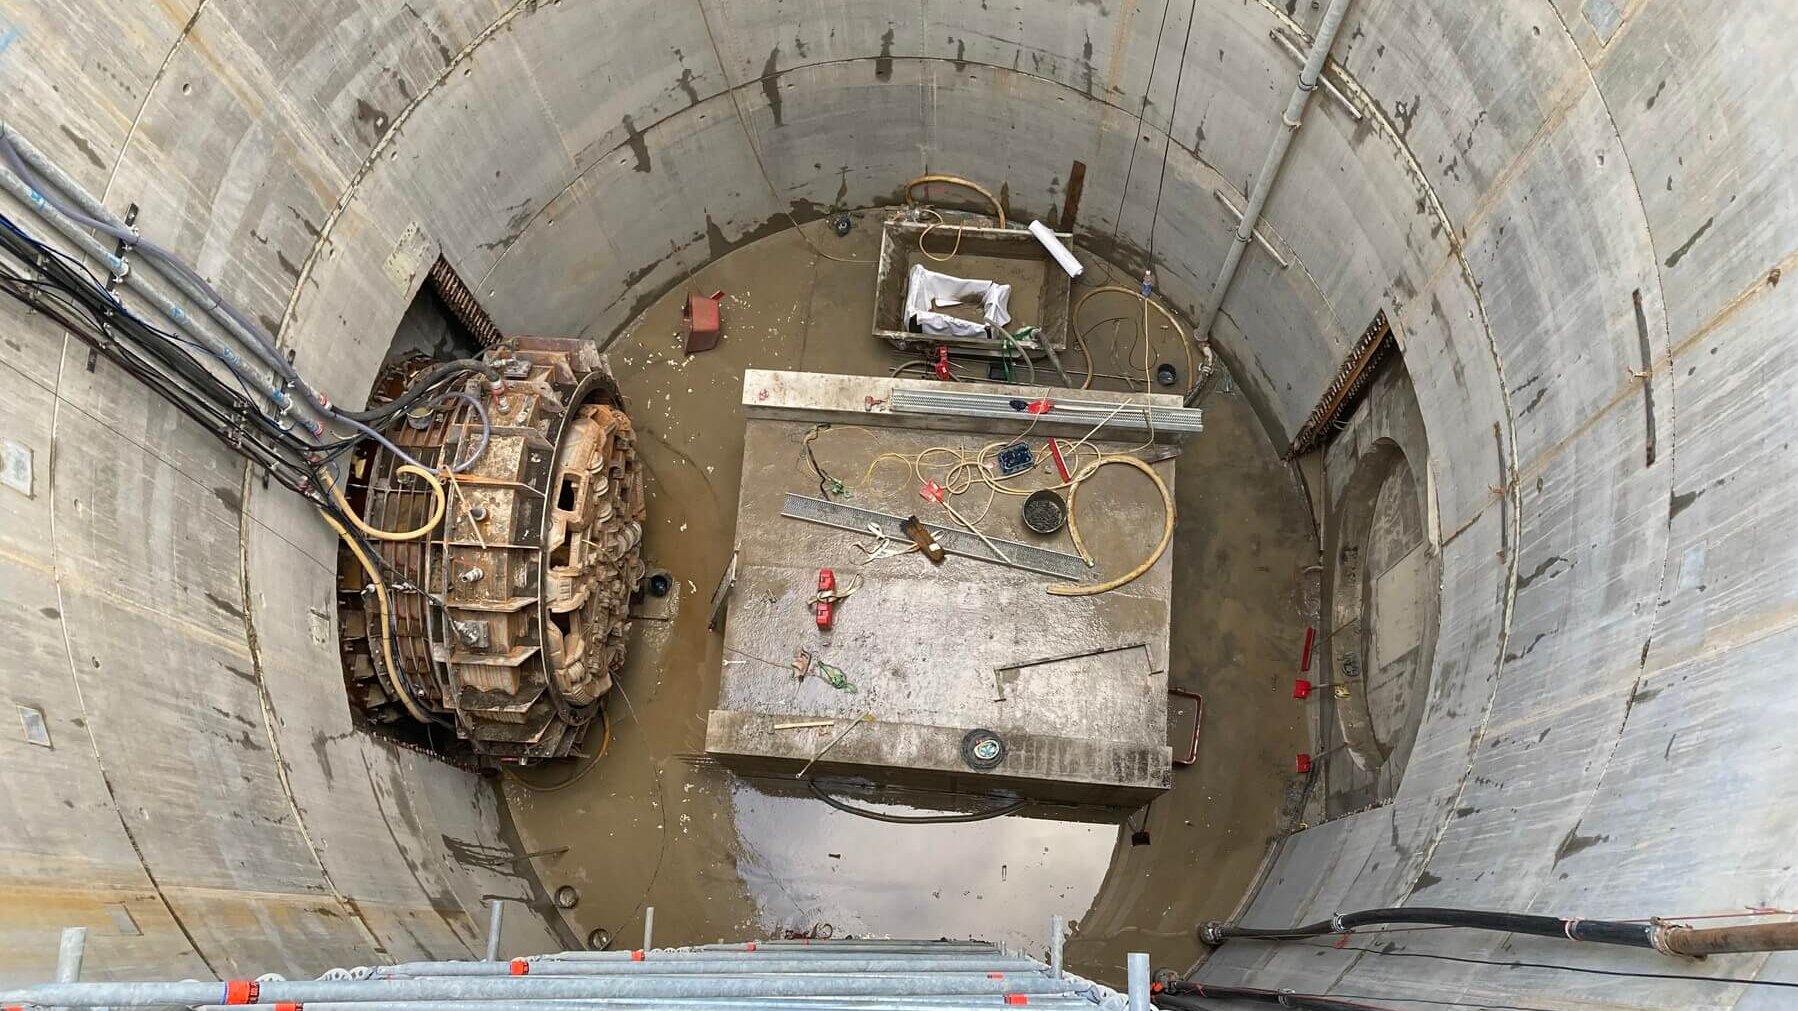 Circular tunnel made of concrete segments. Underneath, the cutting wheel is repaired under atmospheric conditions.